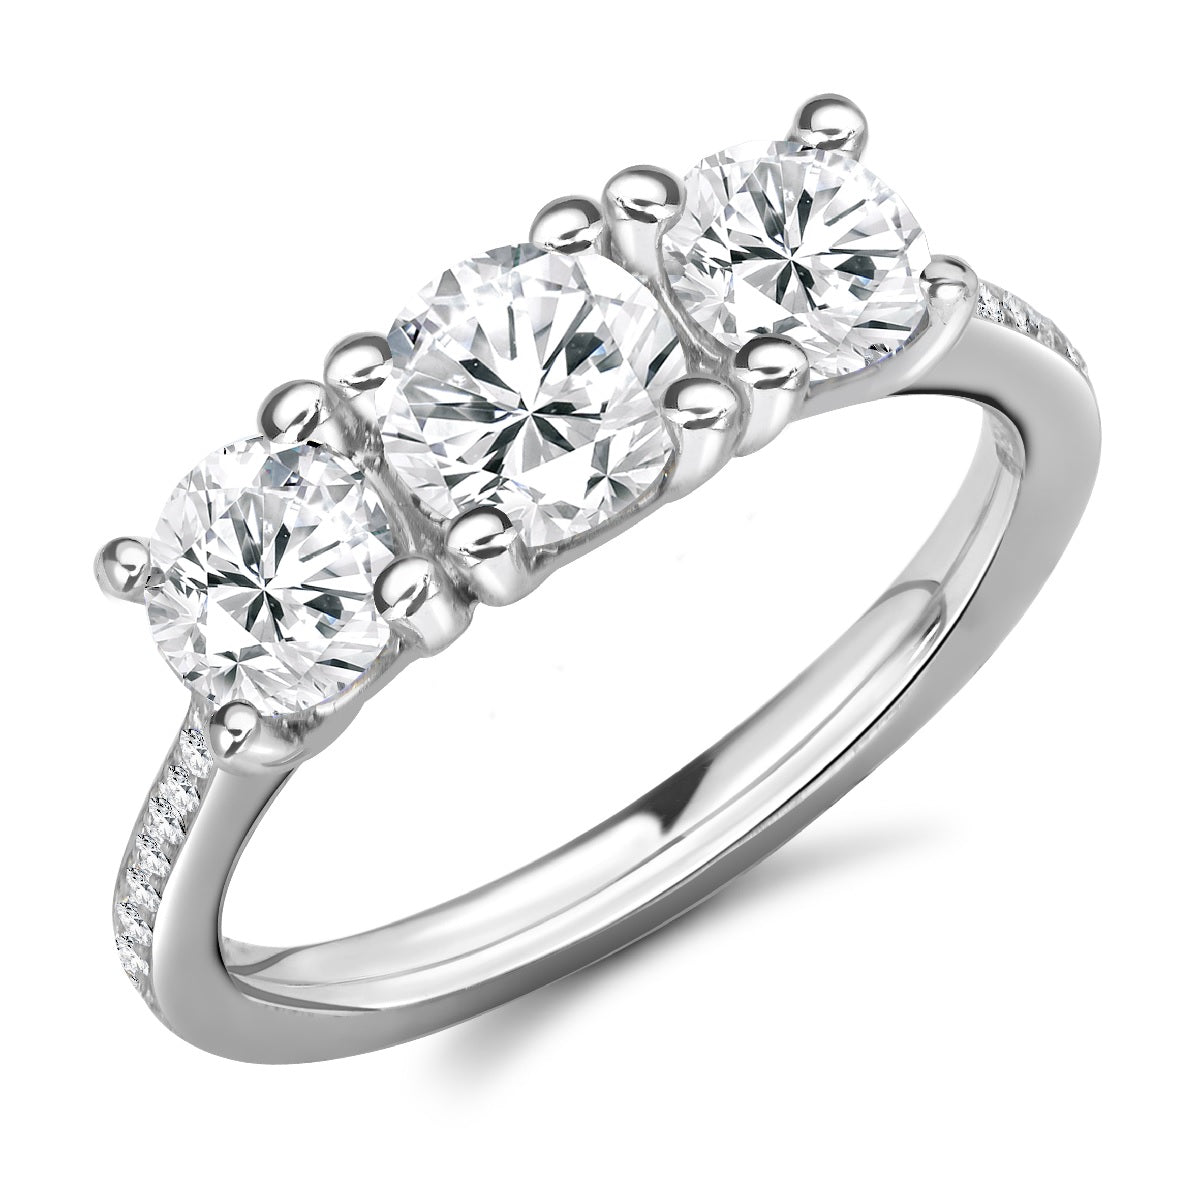 Multi Stone Engagement Rings are typically three and fives diamond rings